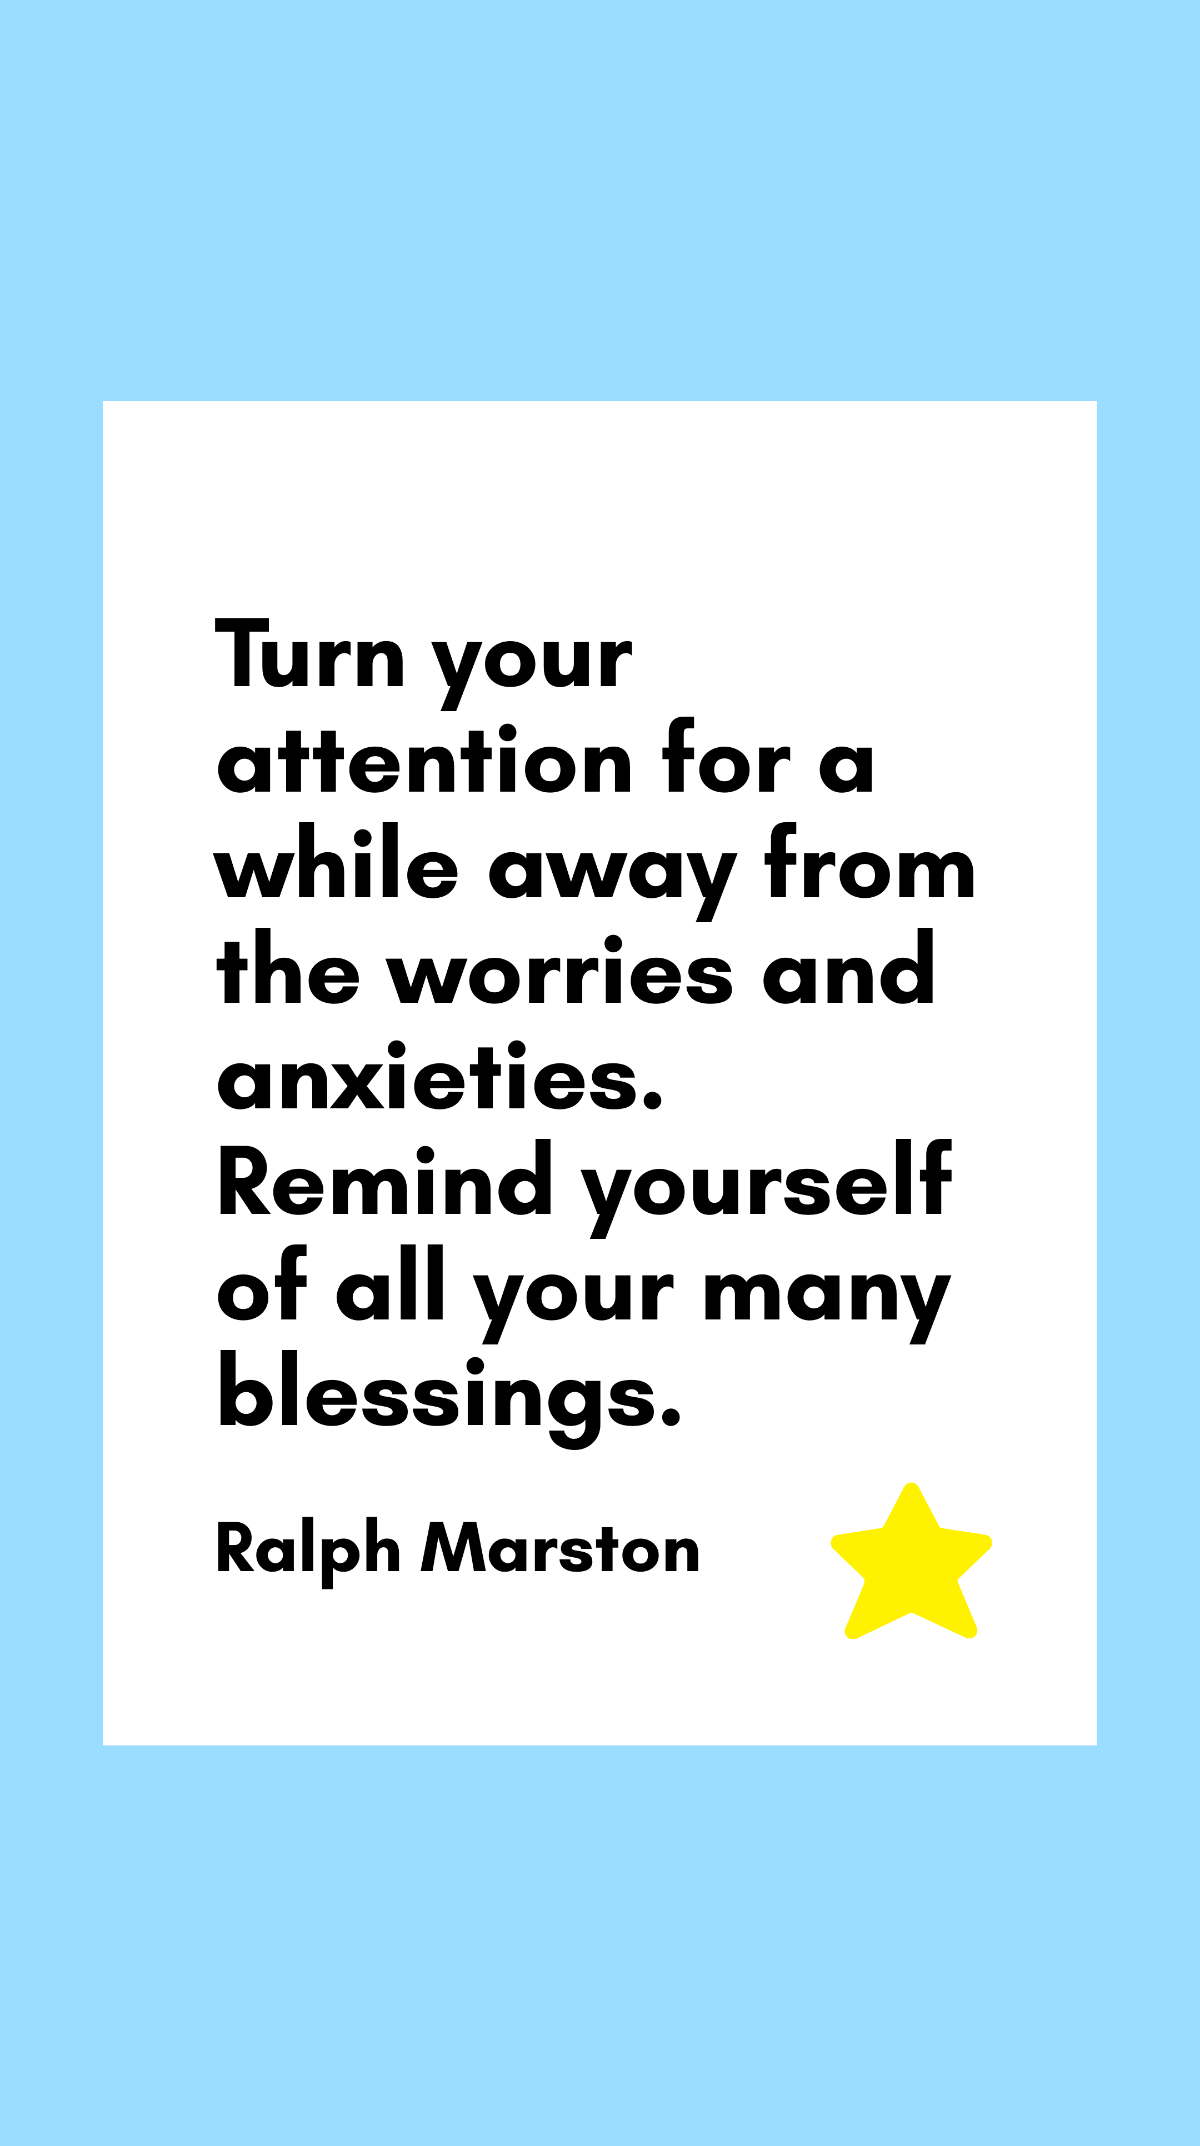 Ralph Marston - Turn your attention for a while away from the worries and anxieties. Remind yourself of all your many blessings.